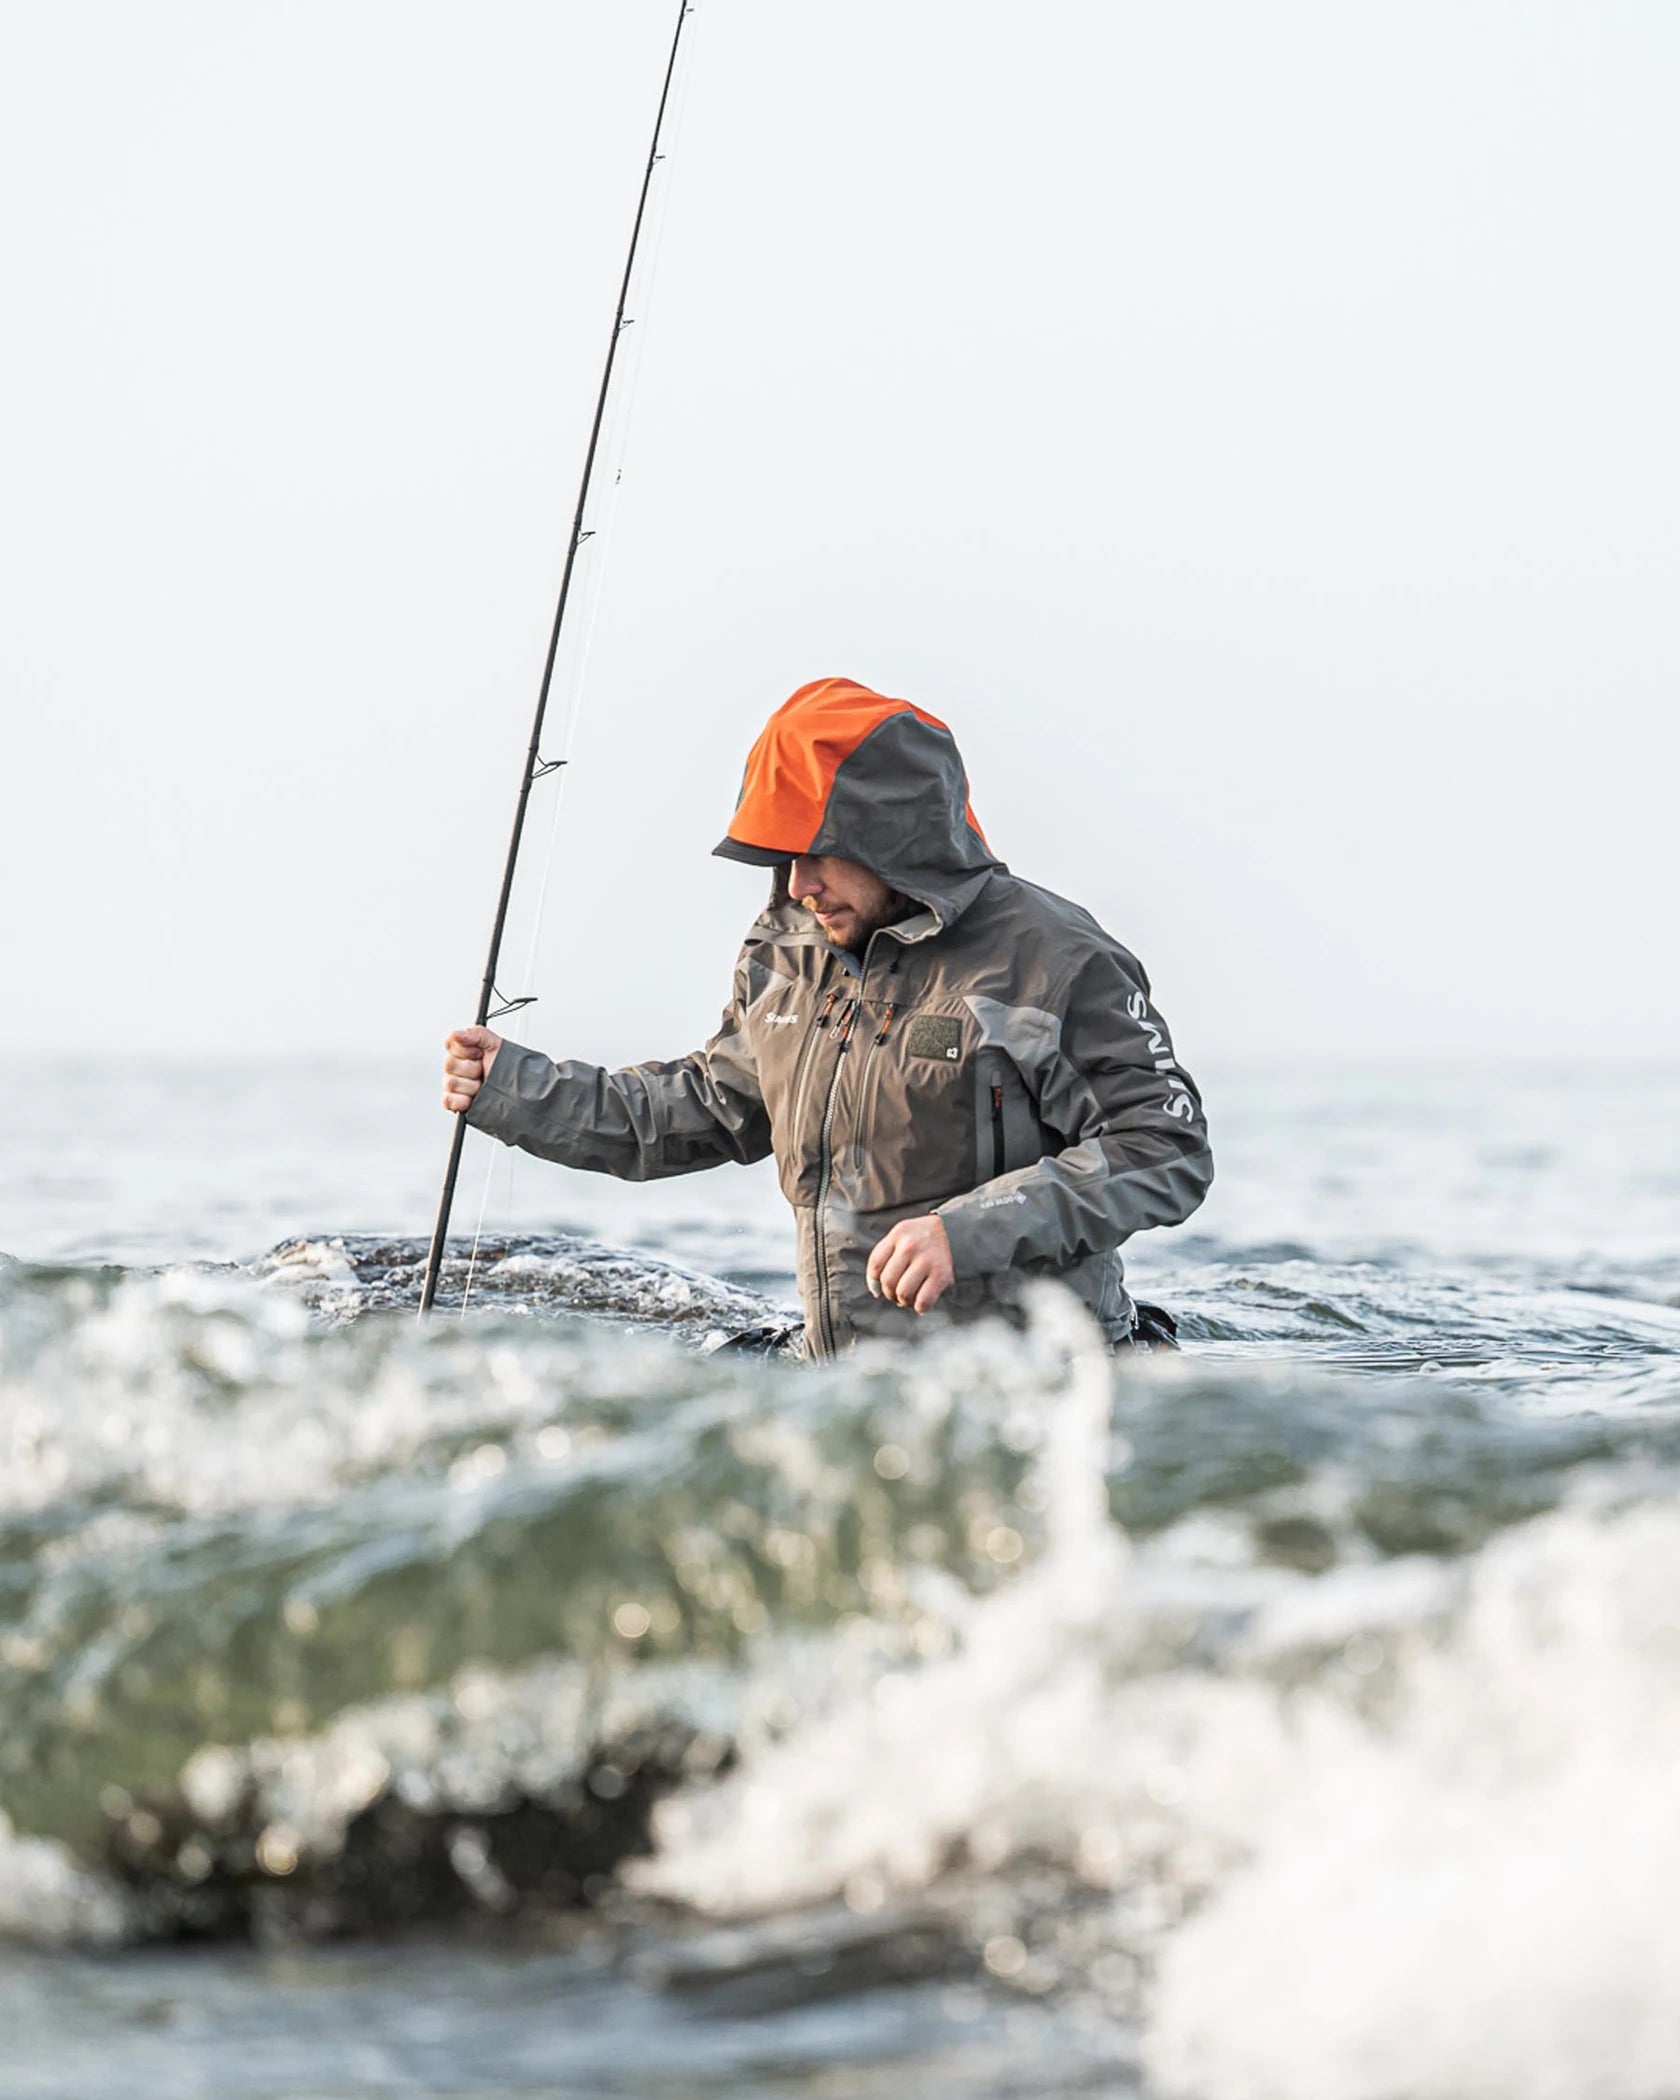 Shop Saltwater Wading Gear: Simms, Patagonia, and More